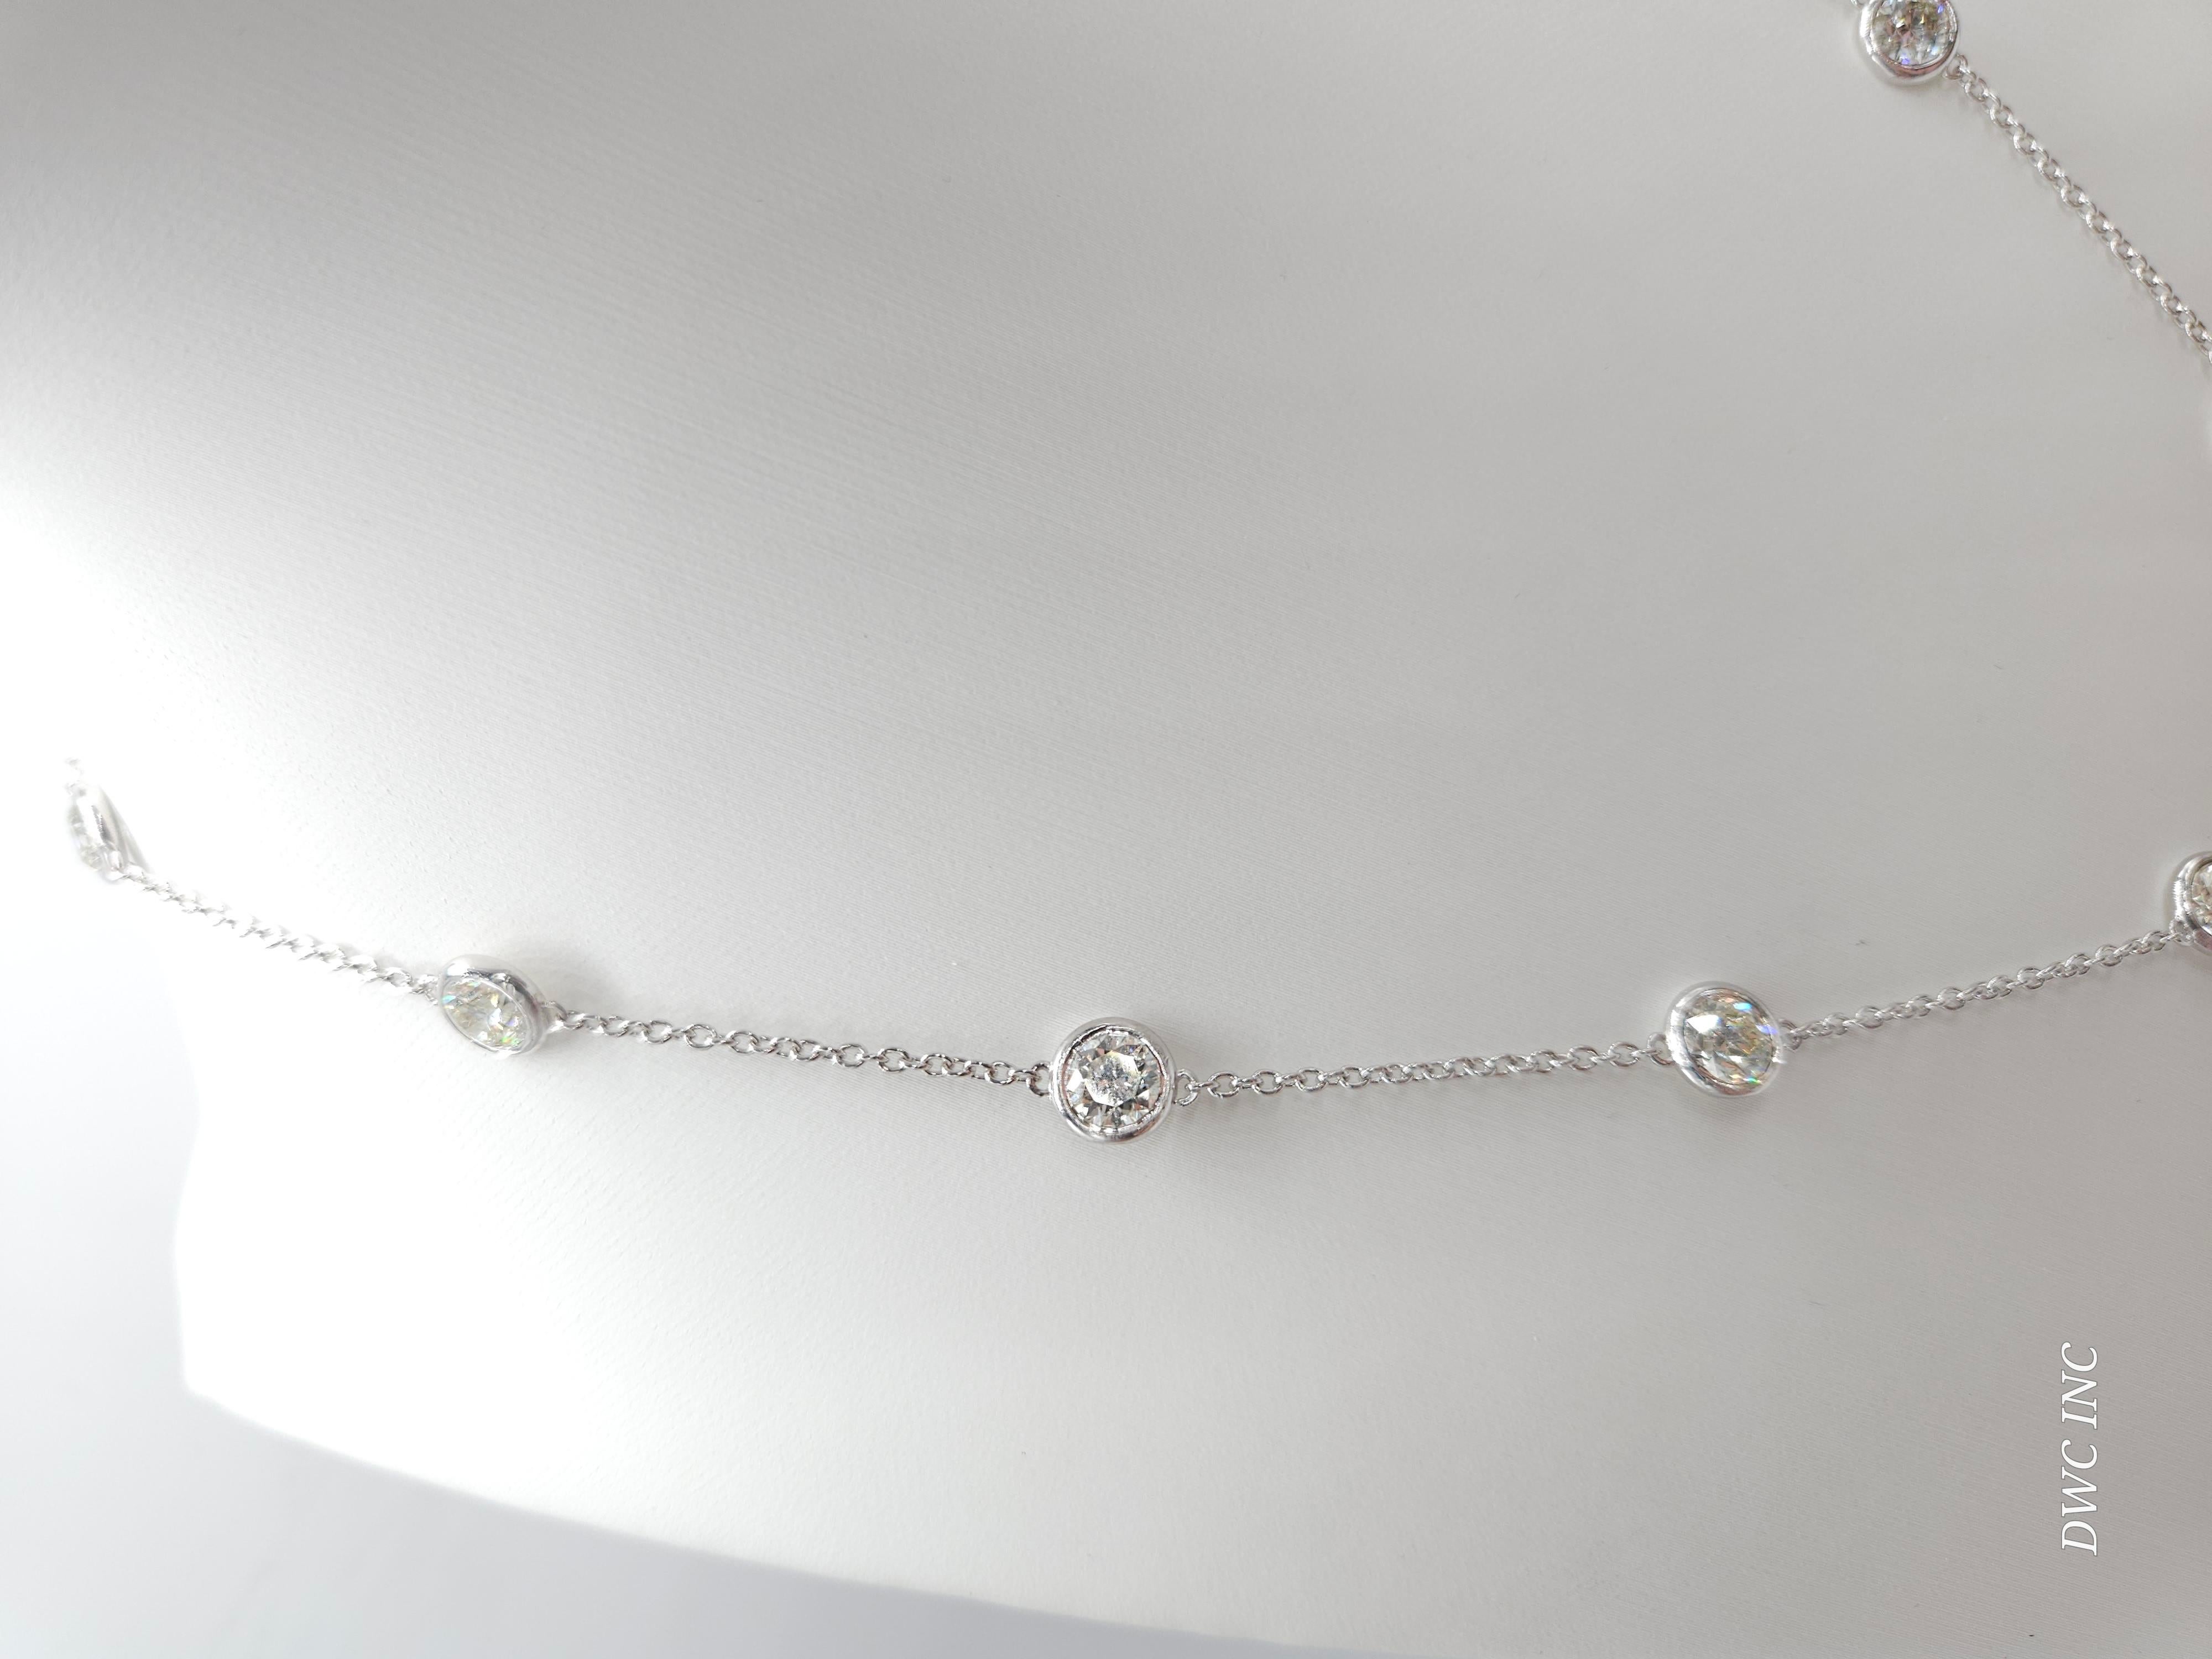 10 Station Diamond by the yard necklace set in Italian made 14K white gold. 
Total weight is 5.03 carats. Beautiful shiny stones. 
Length 16 inch 7.15 grams. Average H-VS,SI

*Free shipping within U.S*